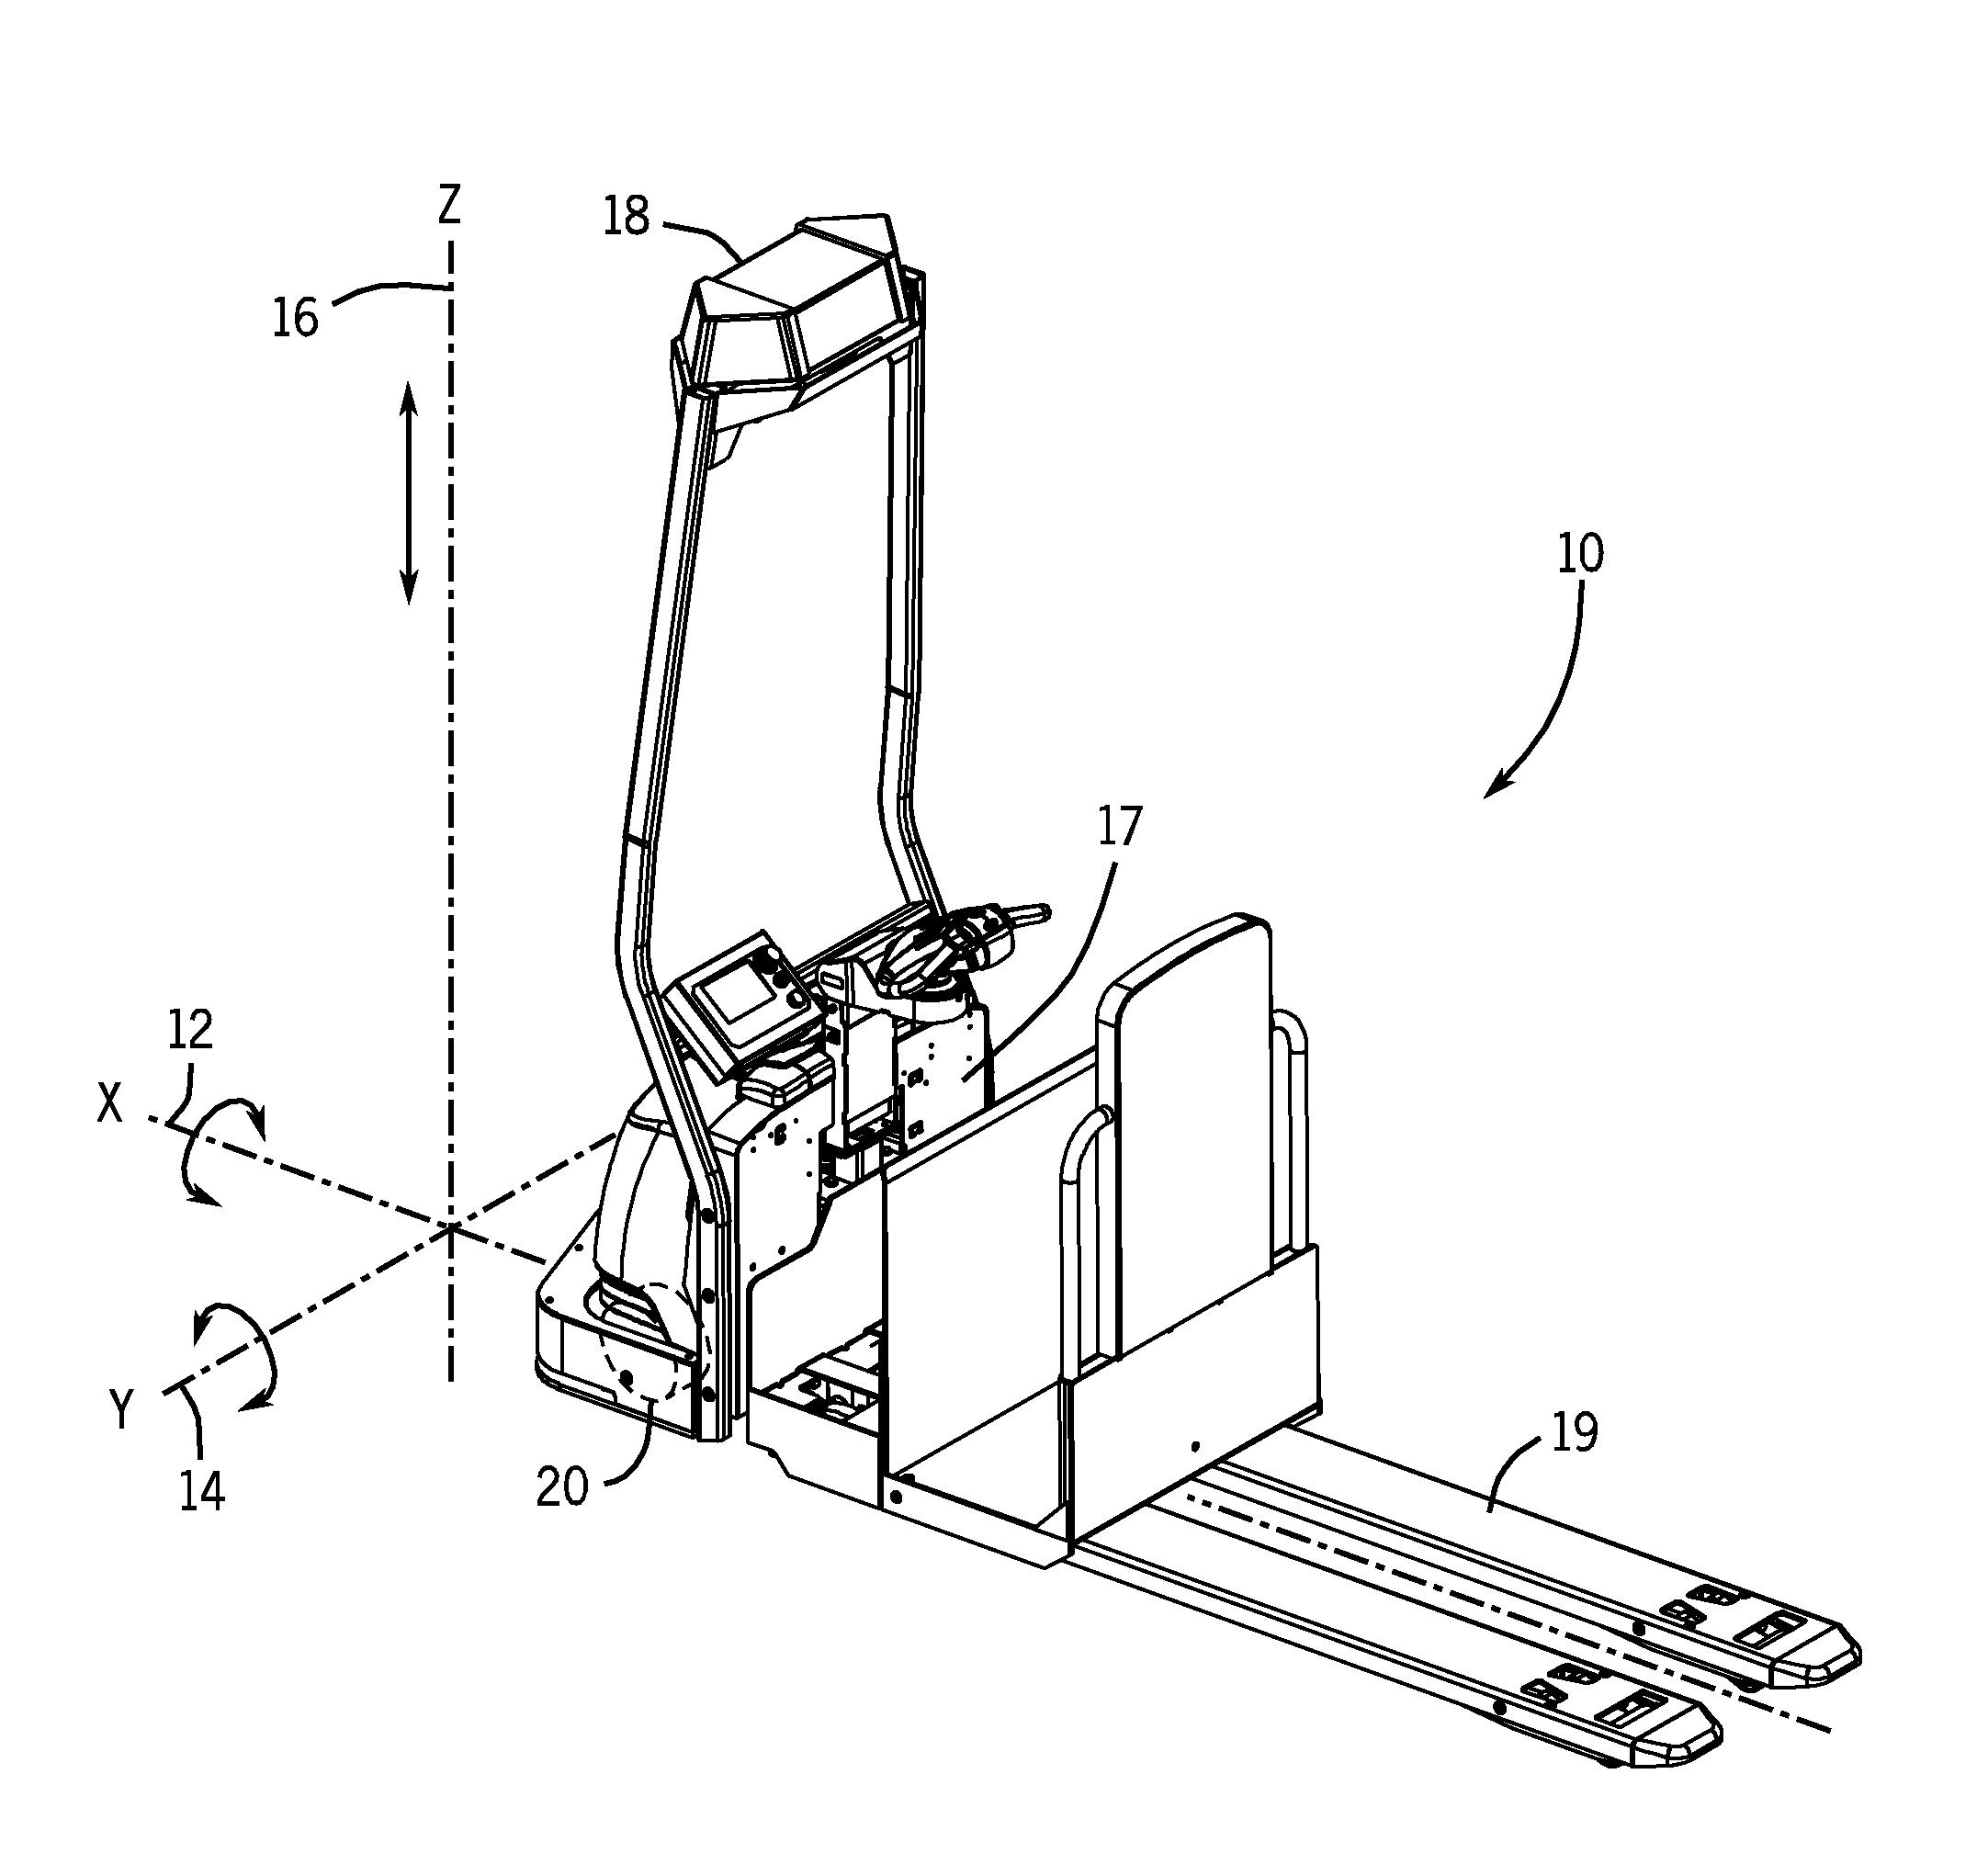 Dynamic stability control systems and methods for industrial lift trucks